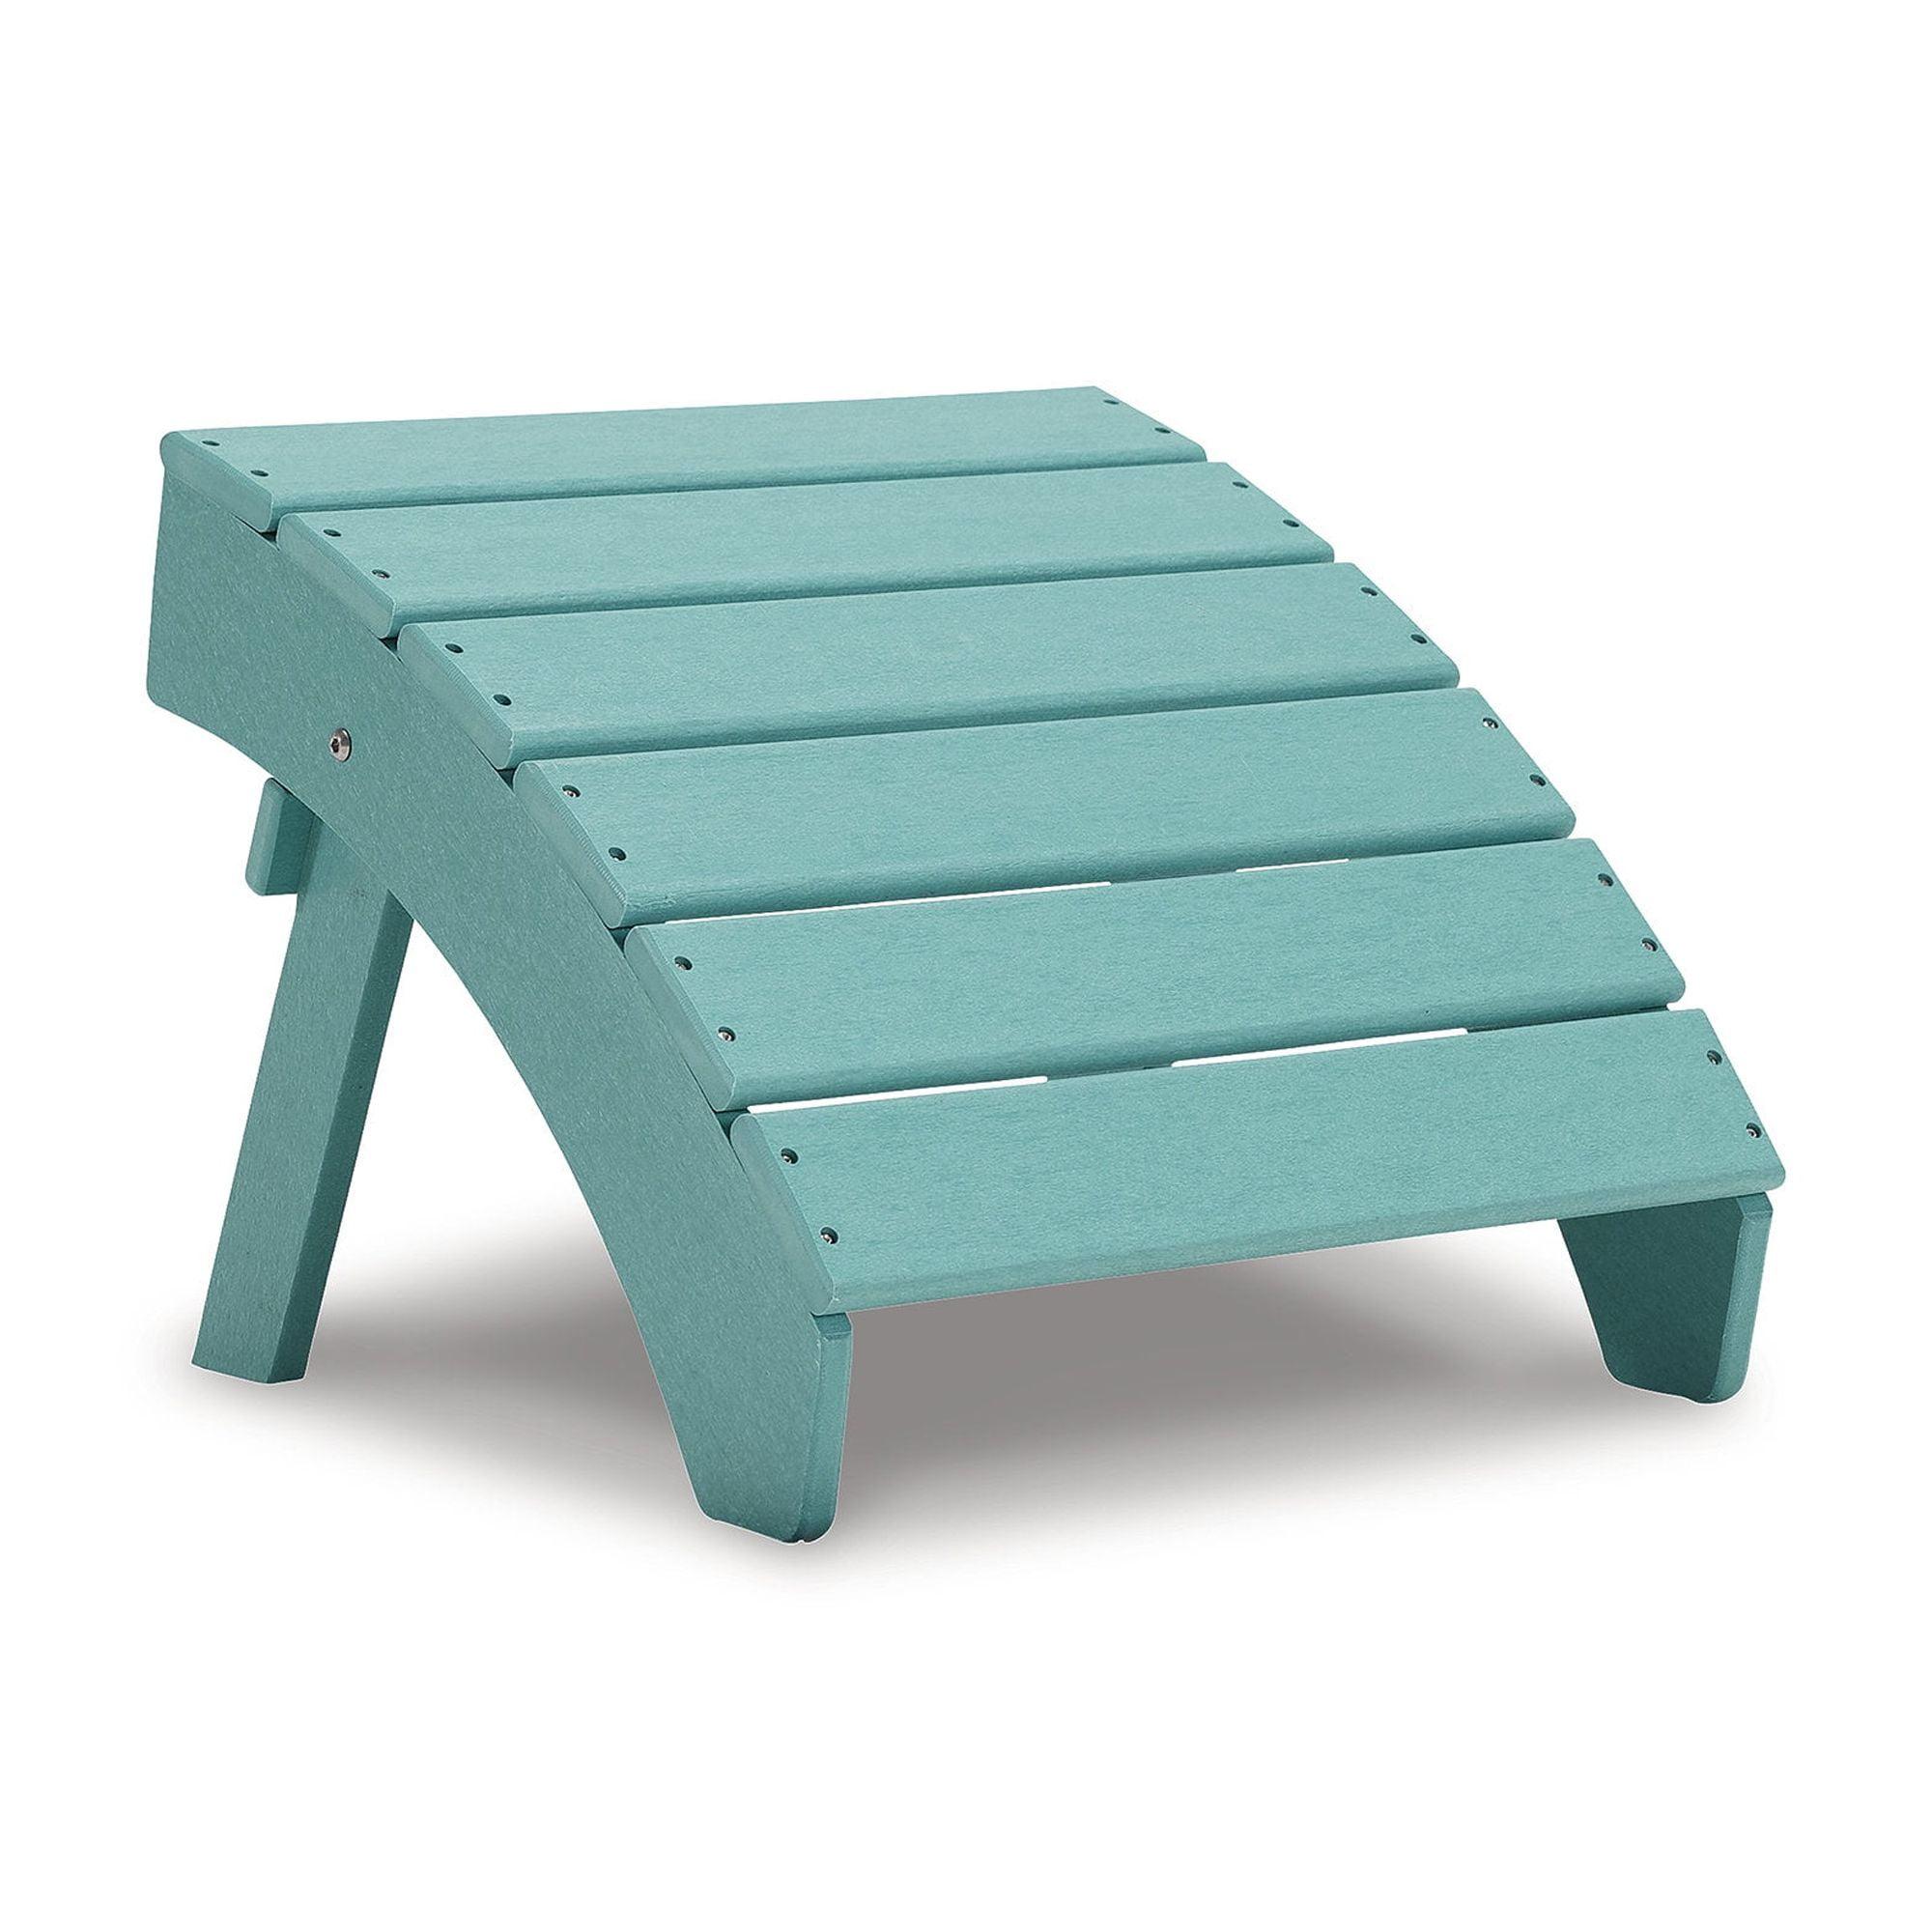 Cottage-Quaint Turquoise Outdoor Ottoman in High-Density Polyethylene